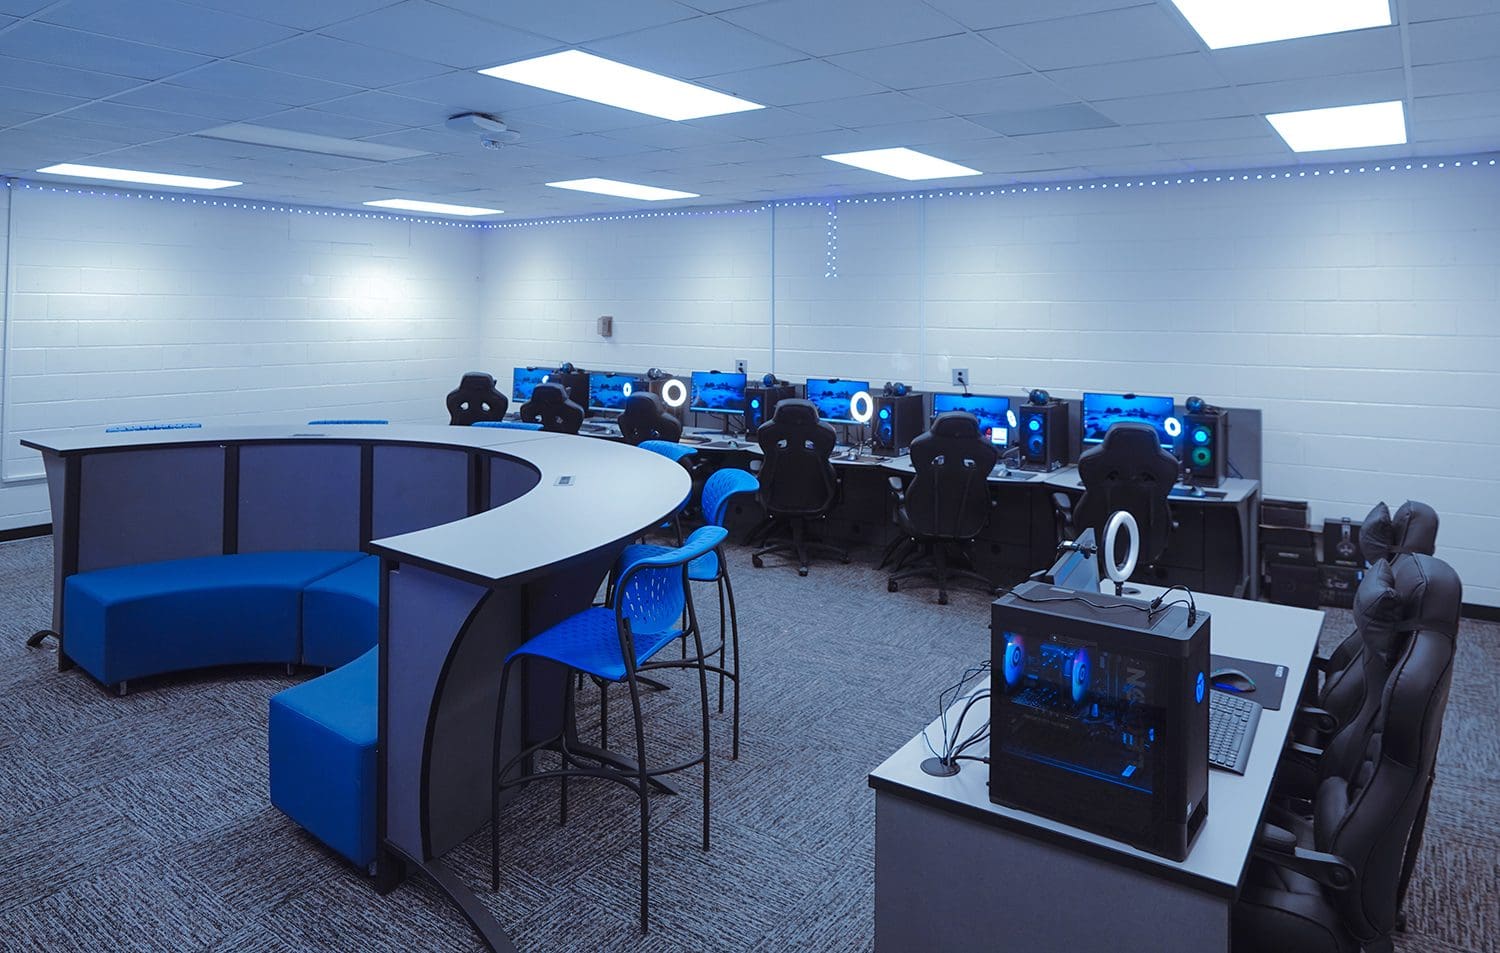 A room with many computers and chairs in it